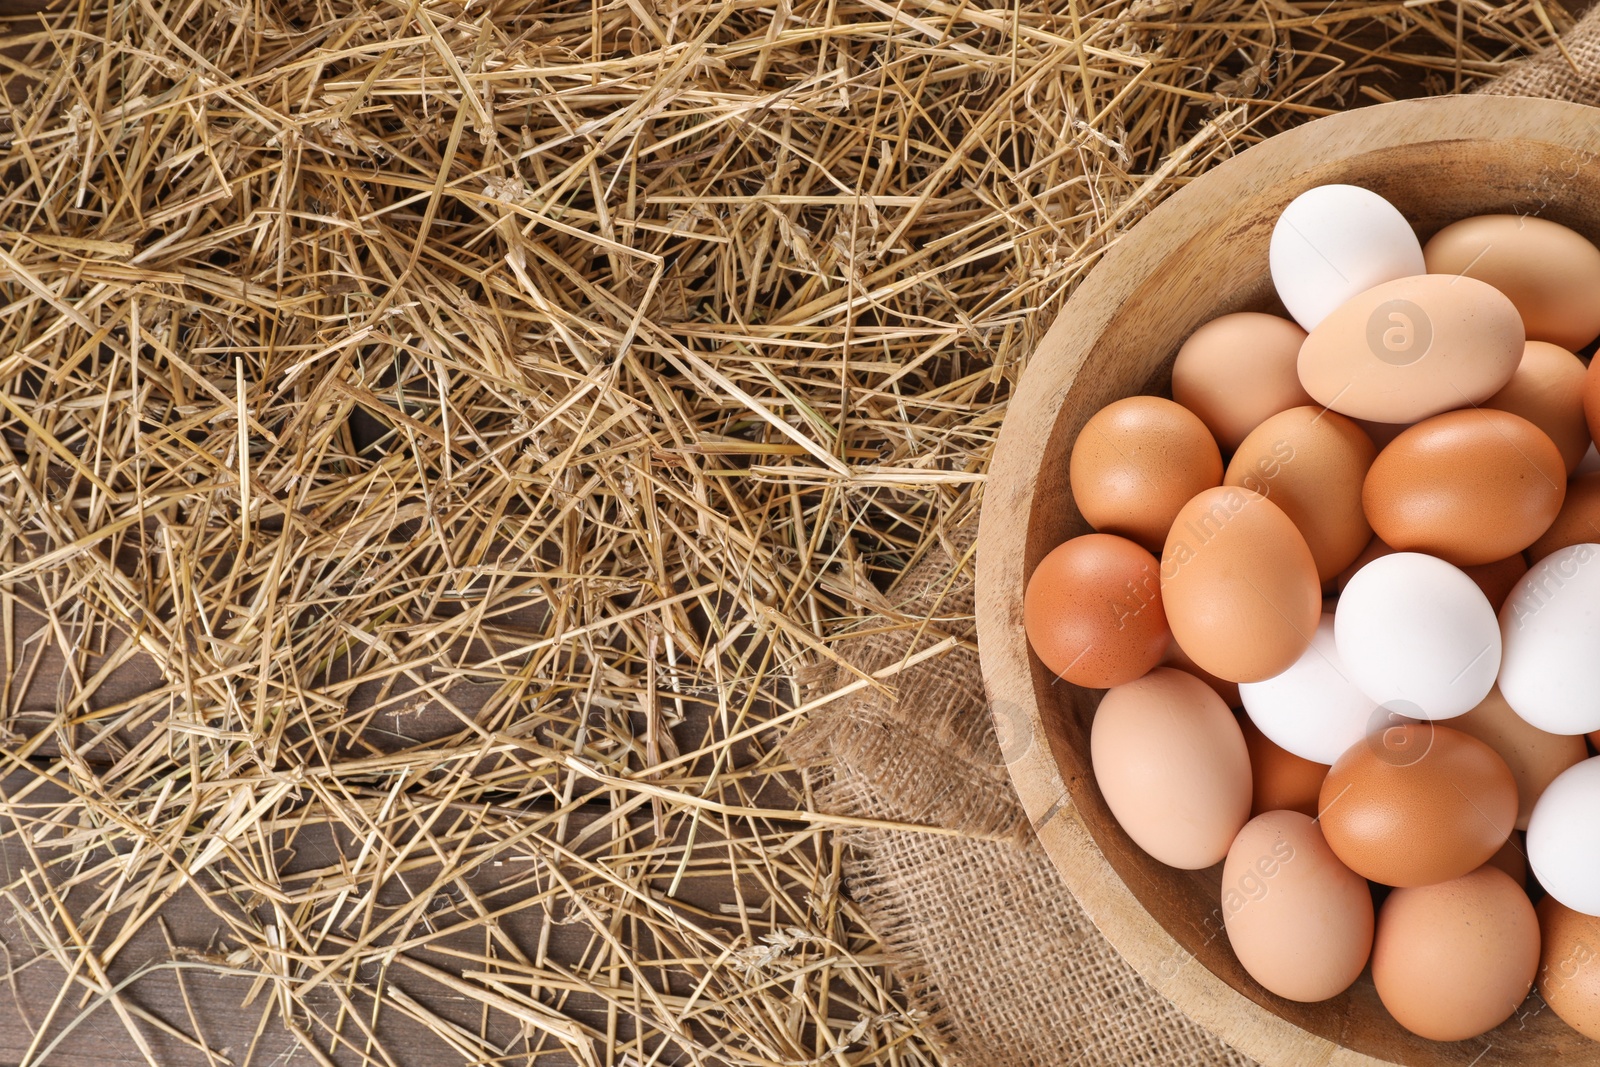 Photo of Fresh chicken eggs in bowl and dried straw on wooden table, top view